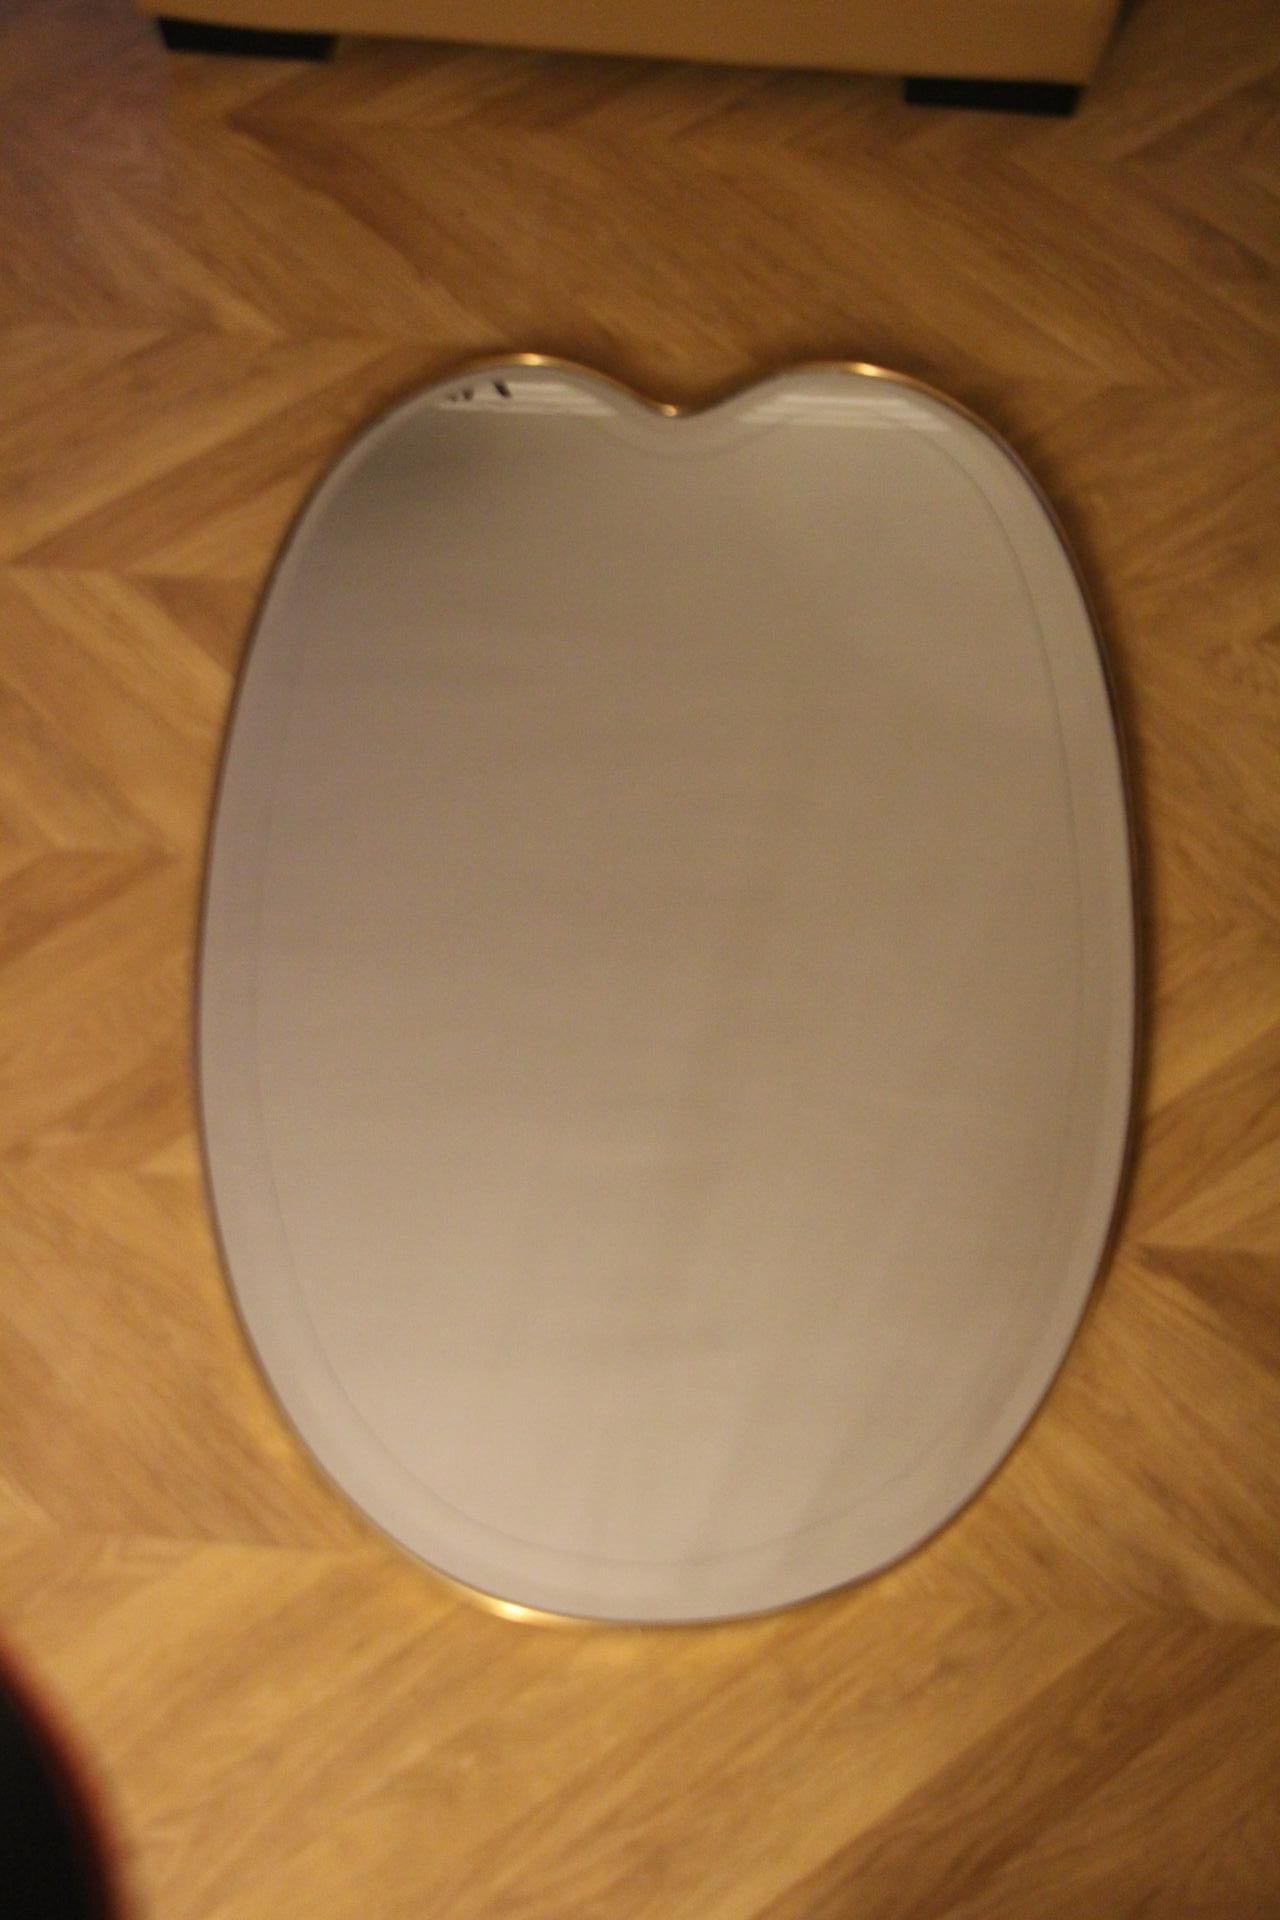 Large 1950's Modernist Shaped Brass Wall Mirror, Heart Shaped, Gio Ponti Style For Sale 5